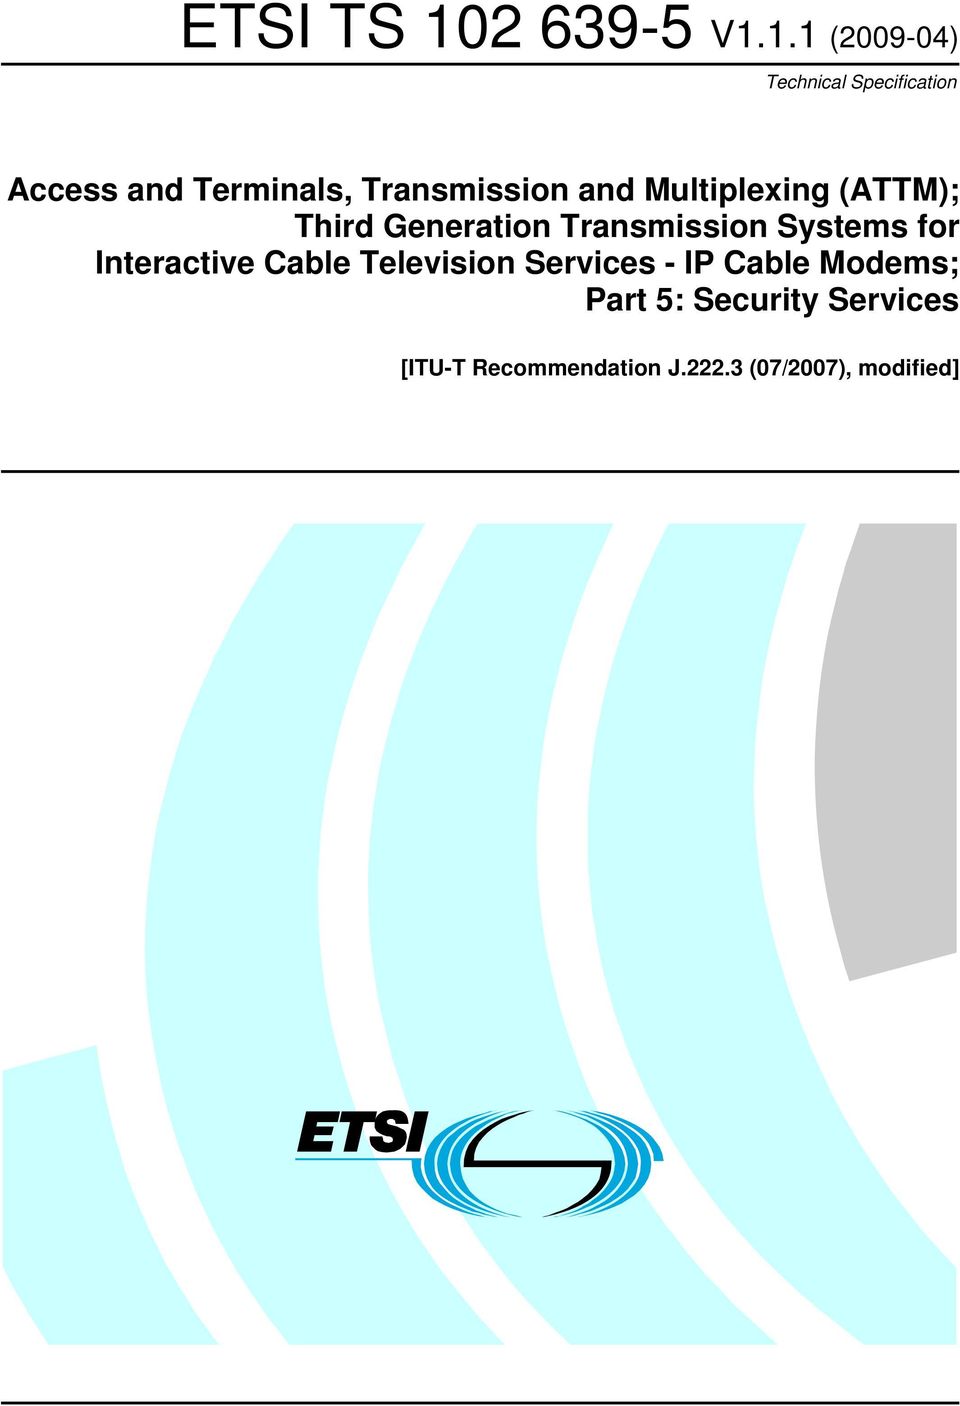 Transmission Systems for Interactive Cable Television Services - IP